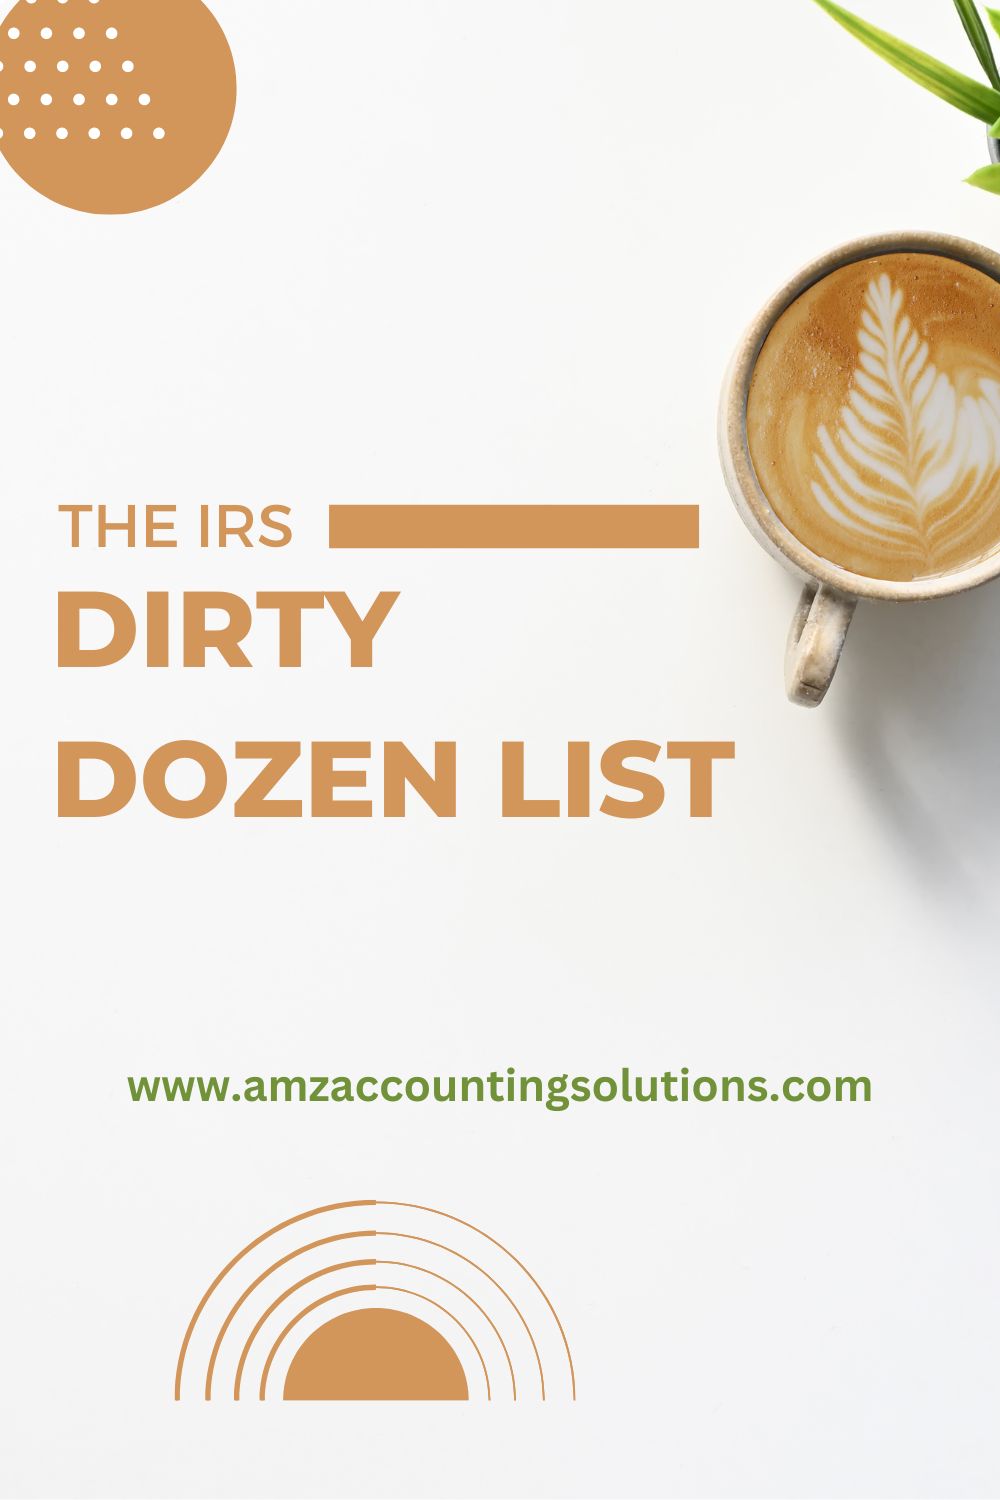 The IRS Dirty Dozen List: More Than Just A Gimmick